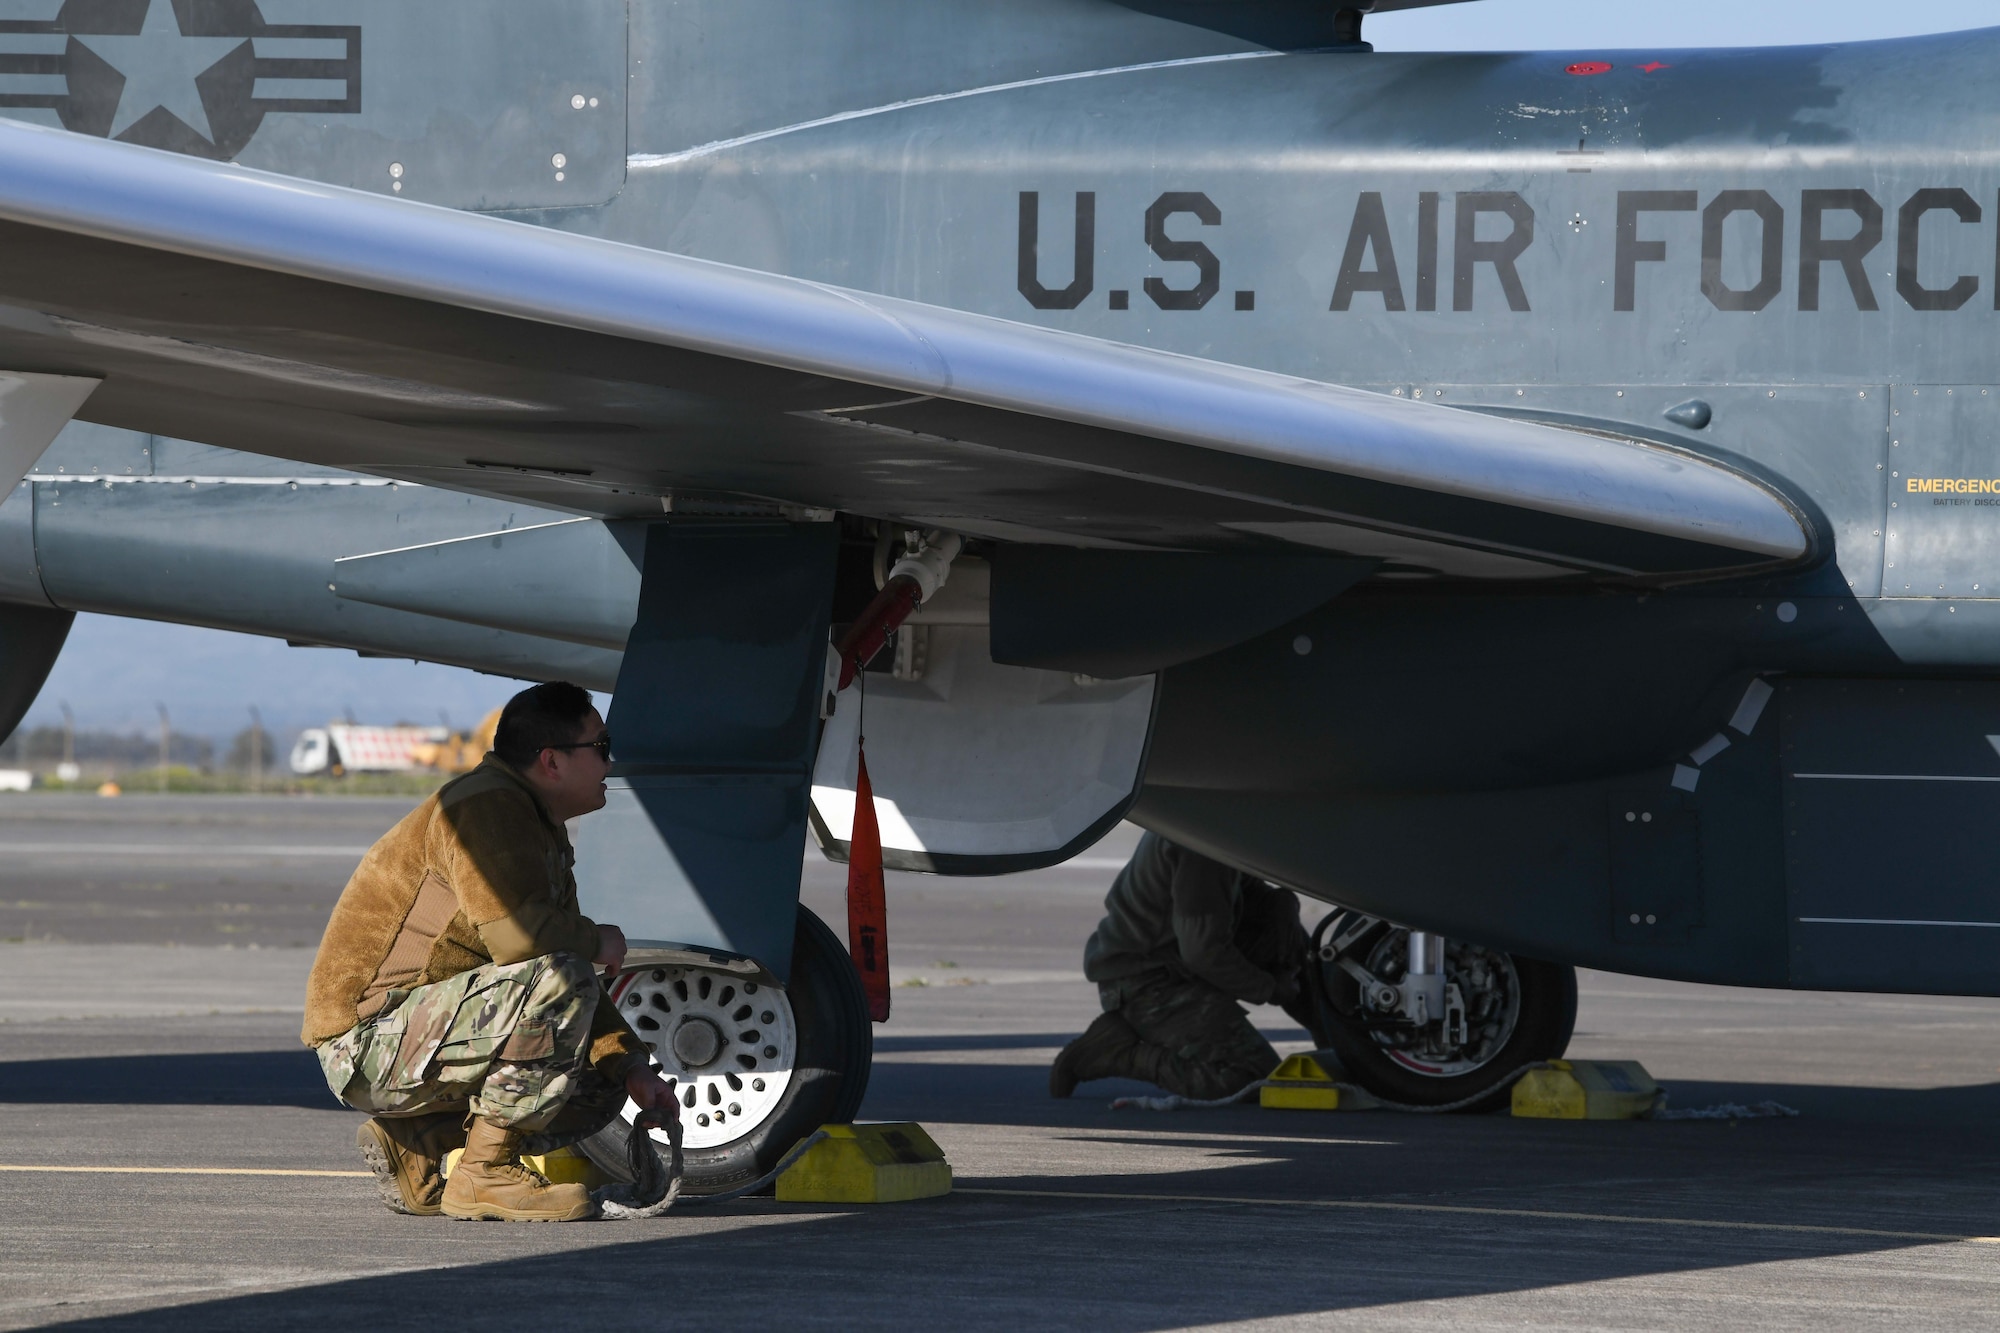 A male airman in a brown jacket and green pants kneels under the wing of a grey aircraft.